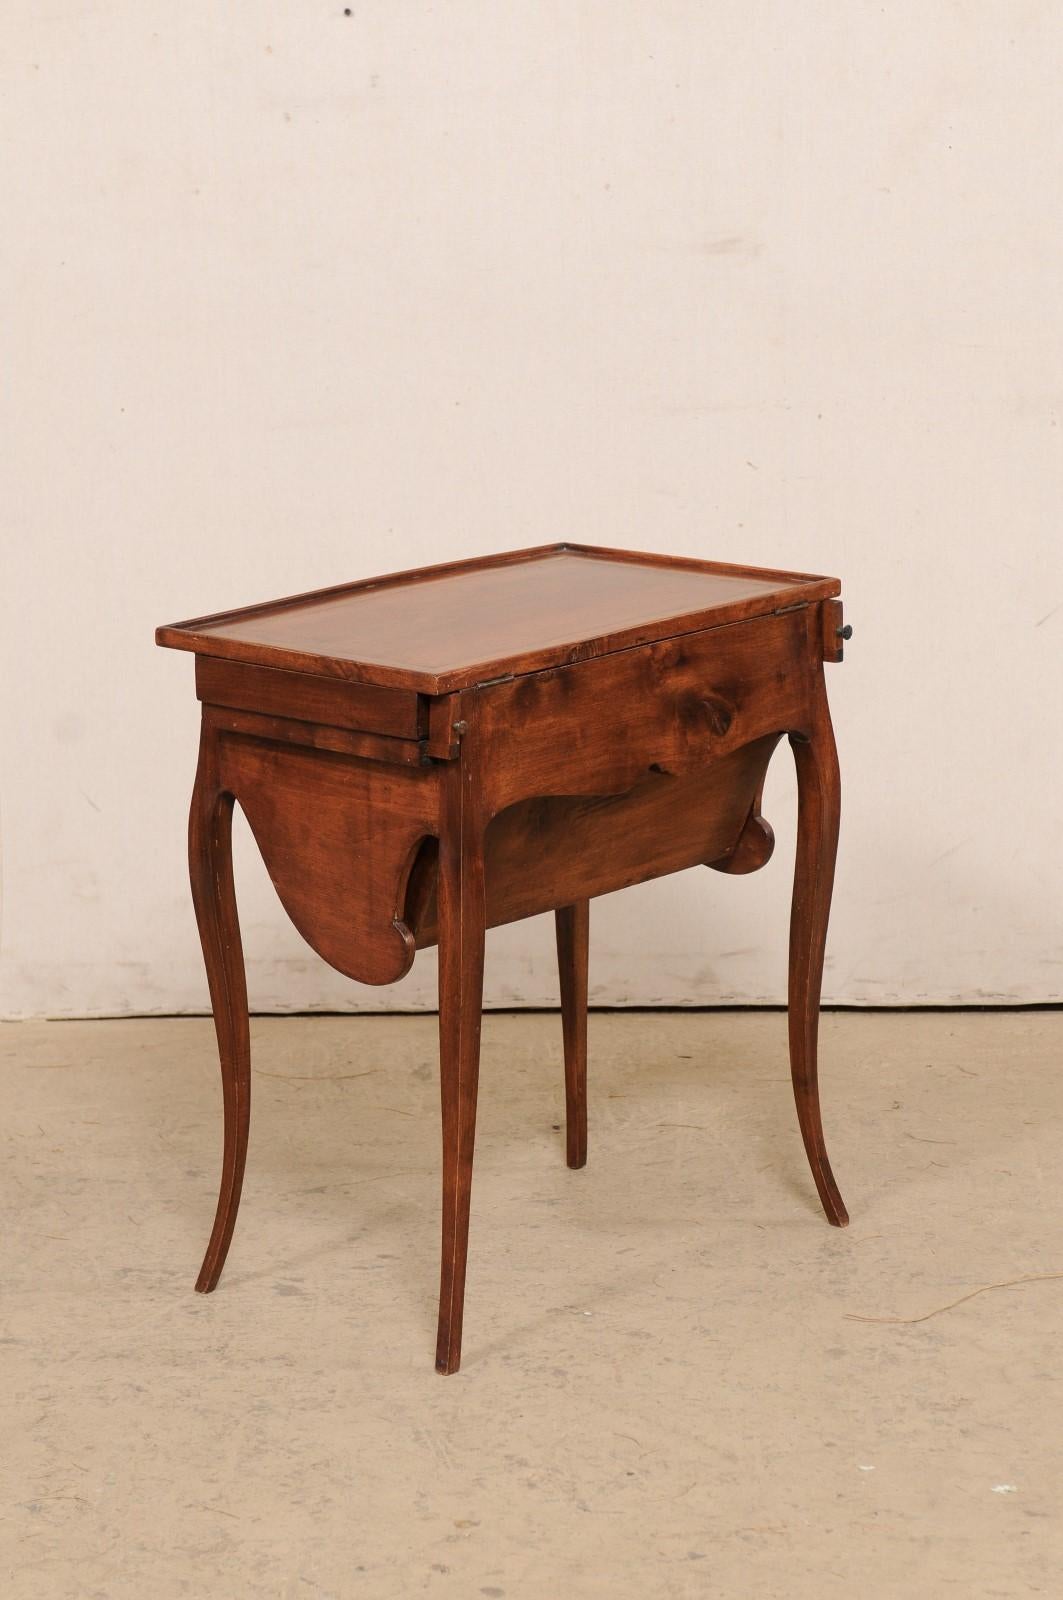 French 19th C. Table w/ Unusual & Creative Drop Down Storage-Great for Crafting 1